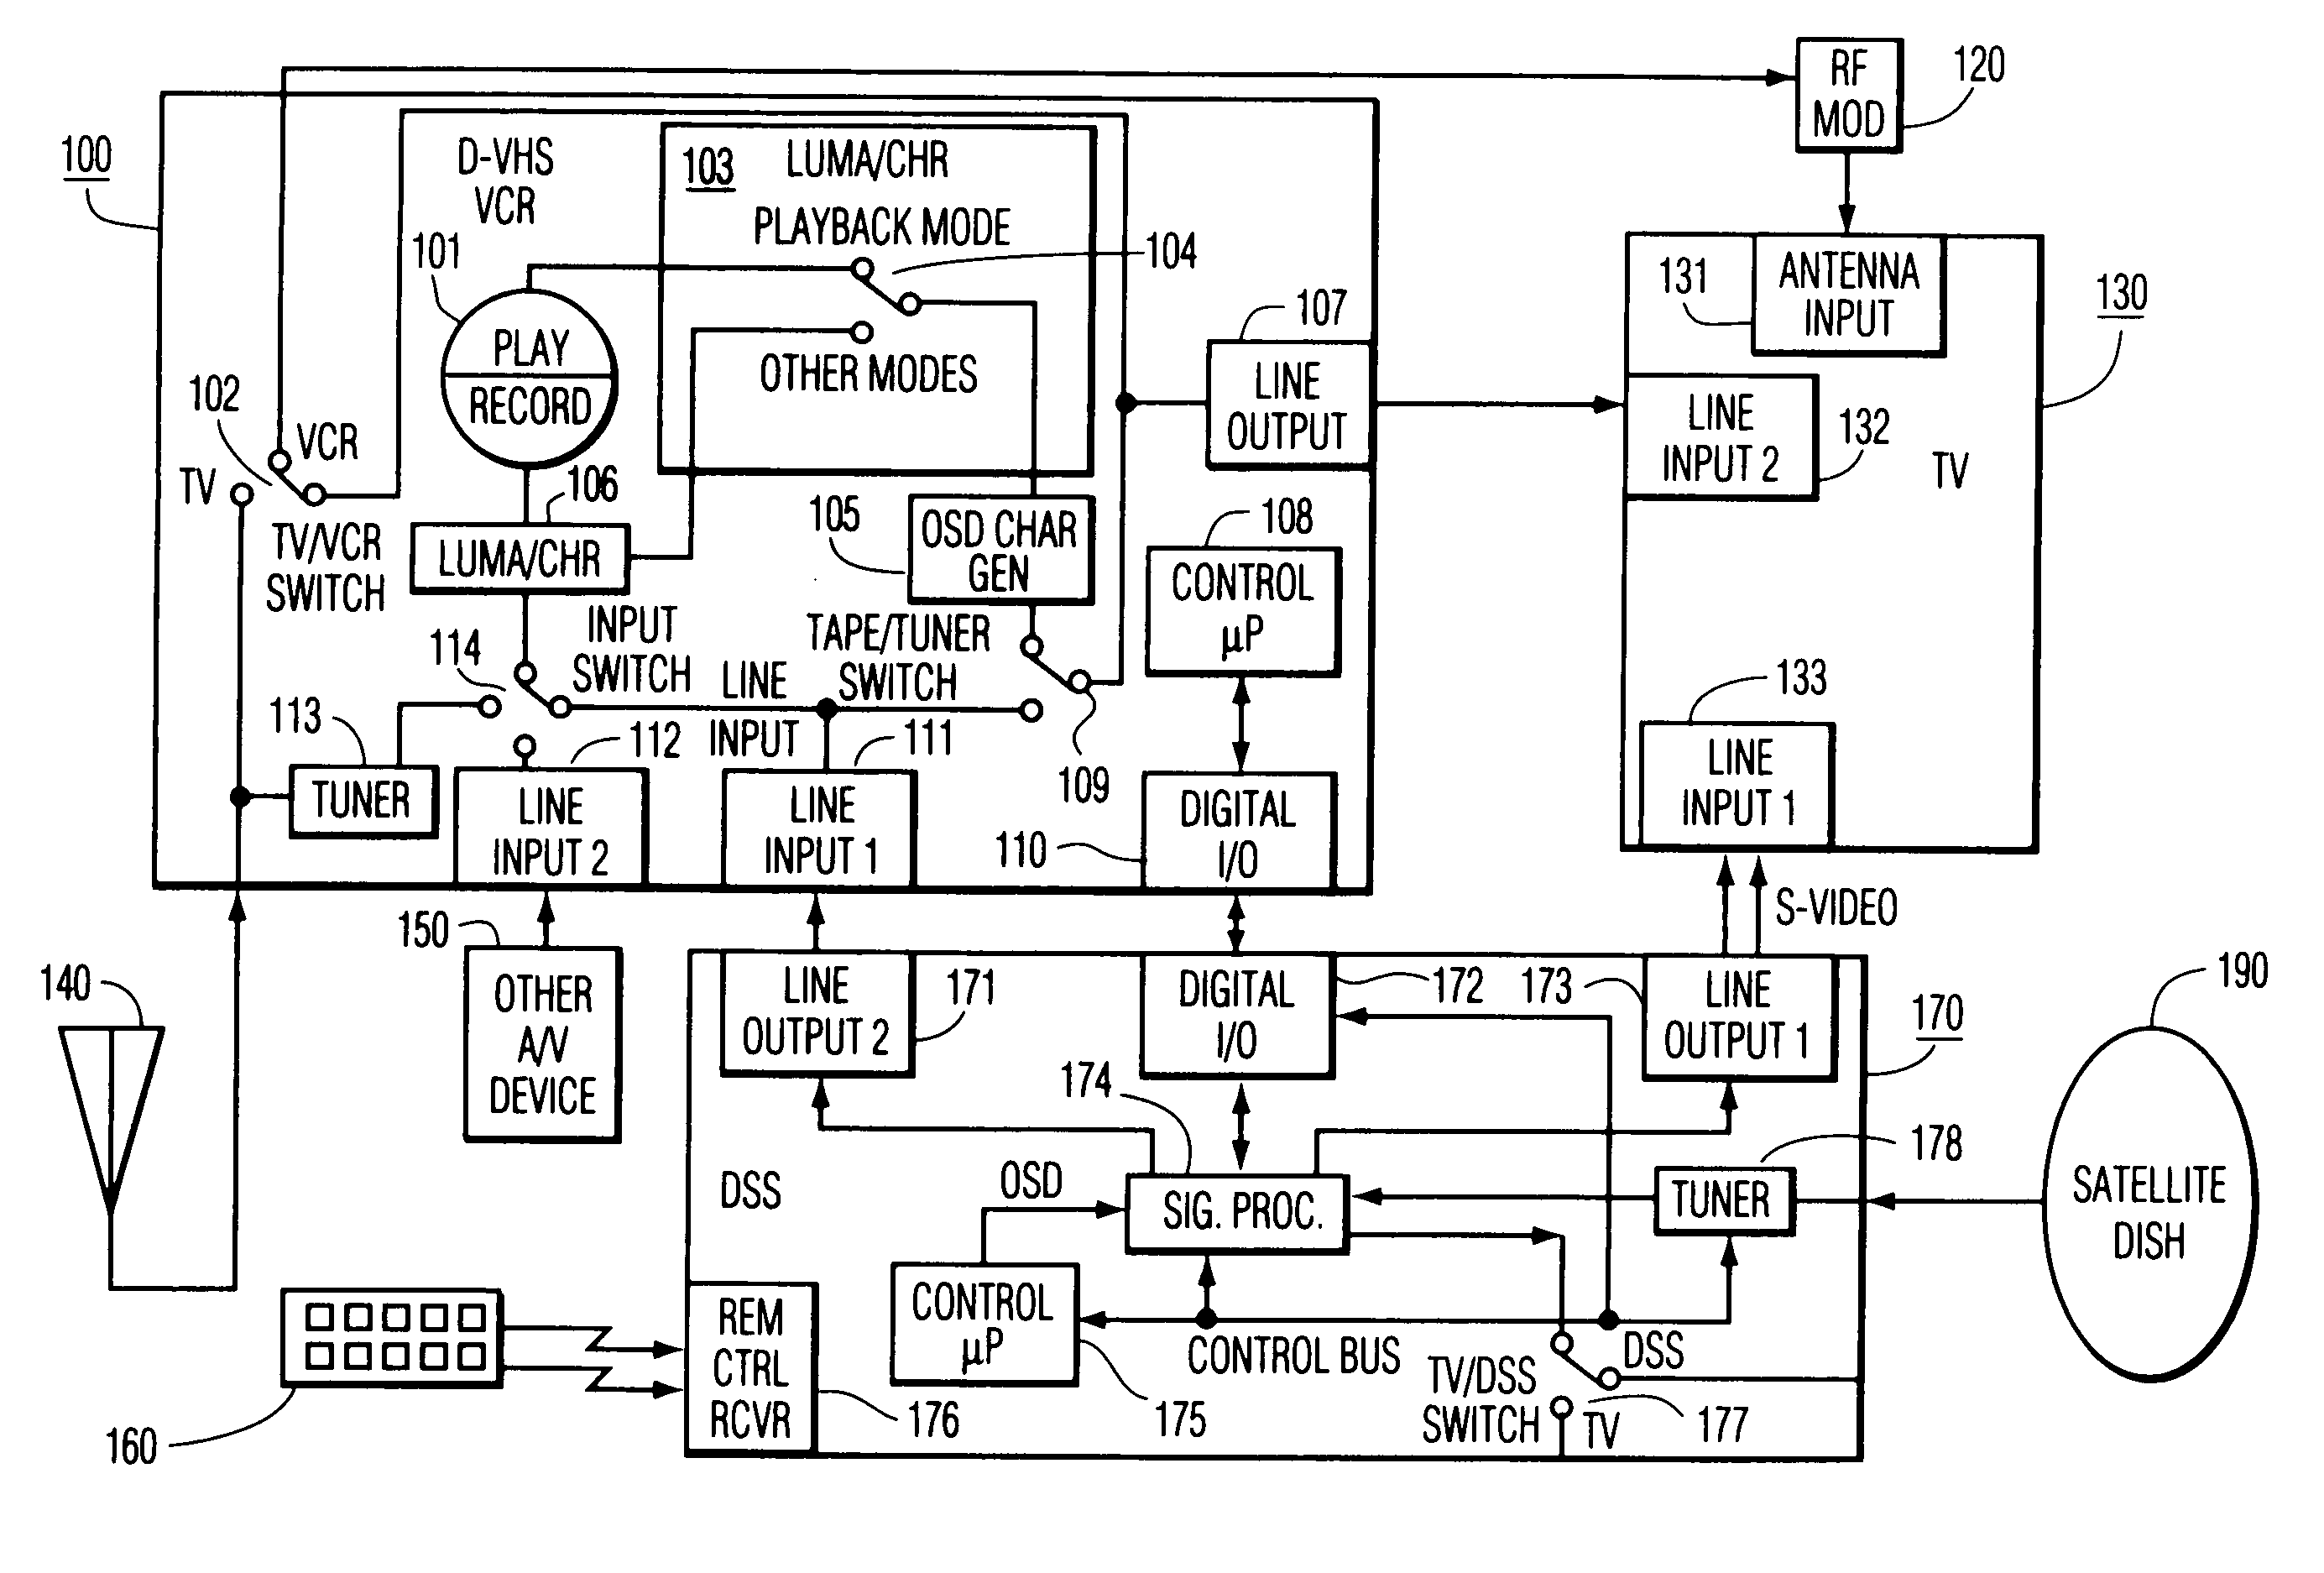 System and method for interfacing multiple electronic devices